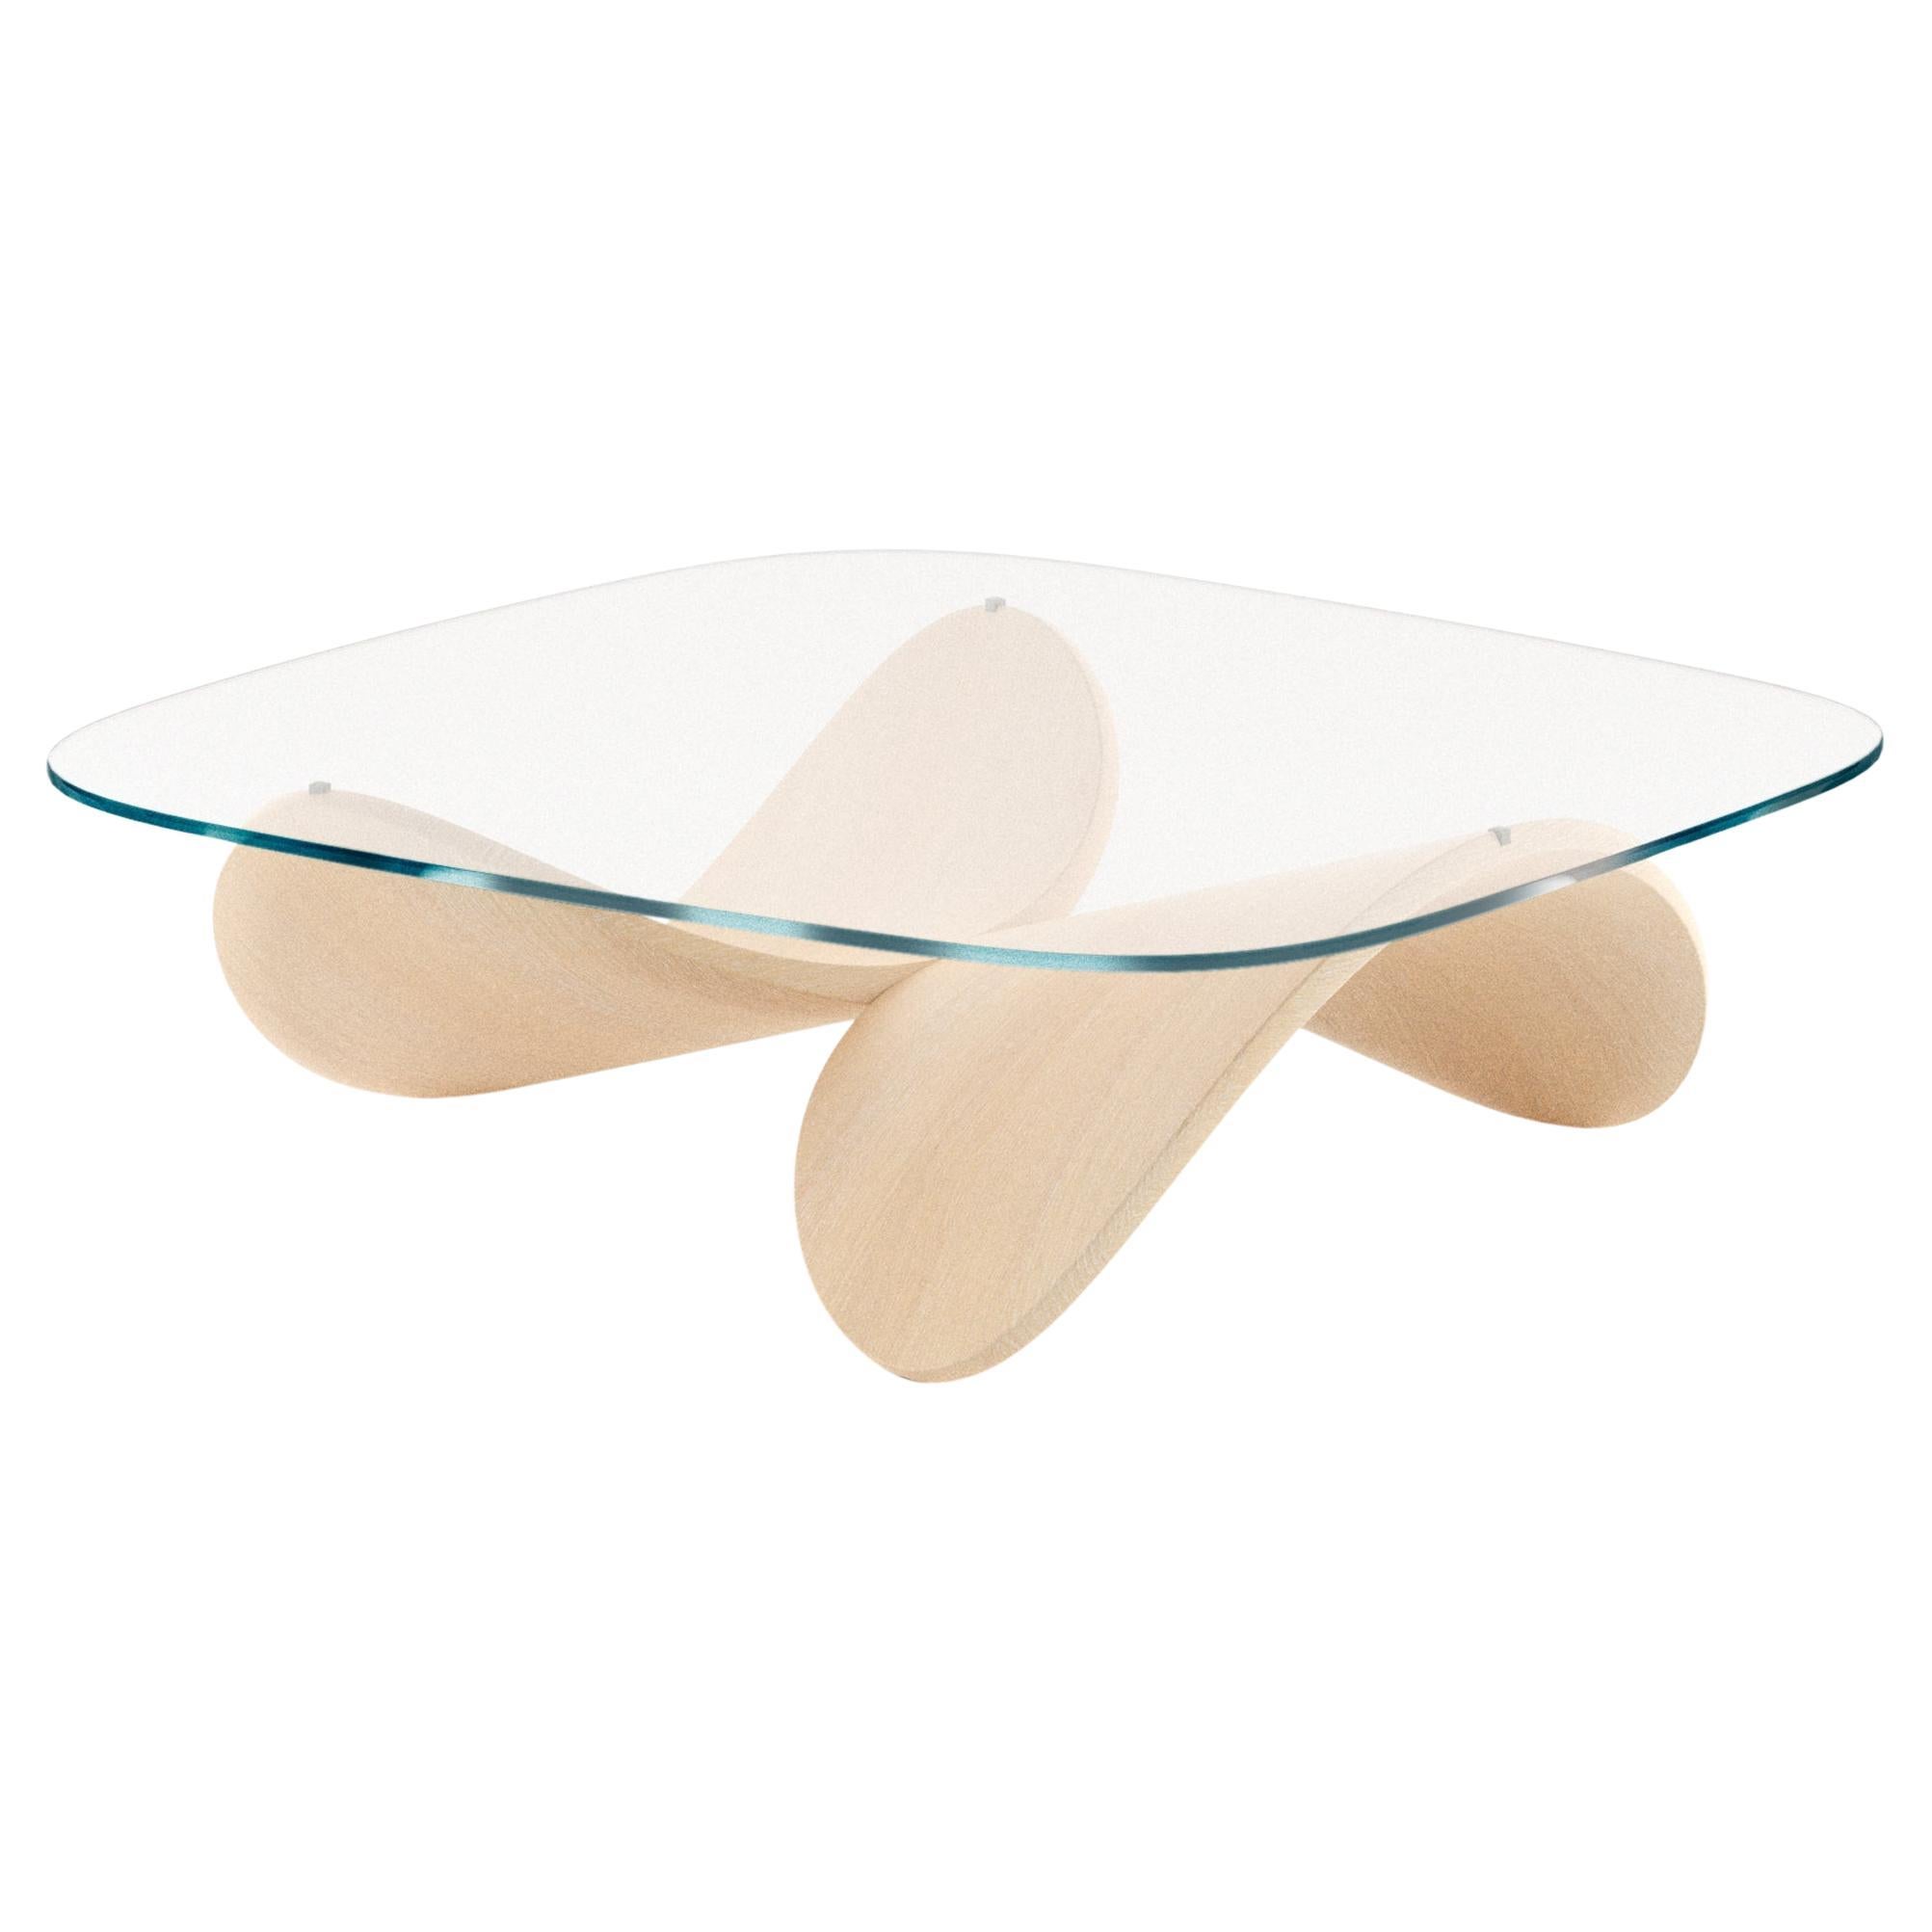 Sandro Lopez's Sculptural Coffee Table in Bent Solid Wood, Natural Ash, Italy